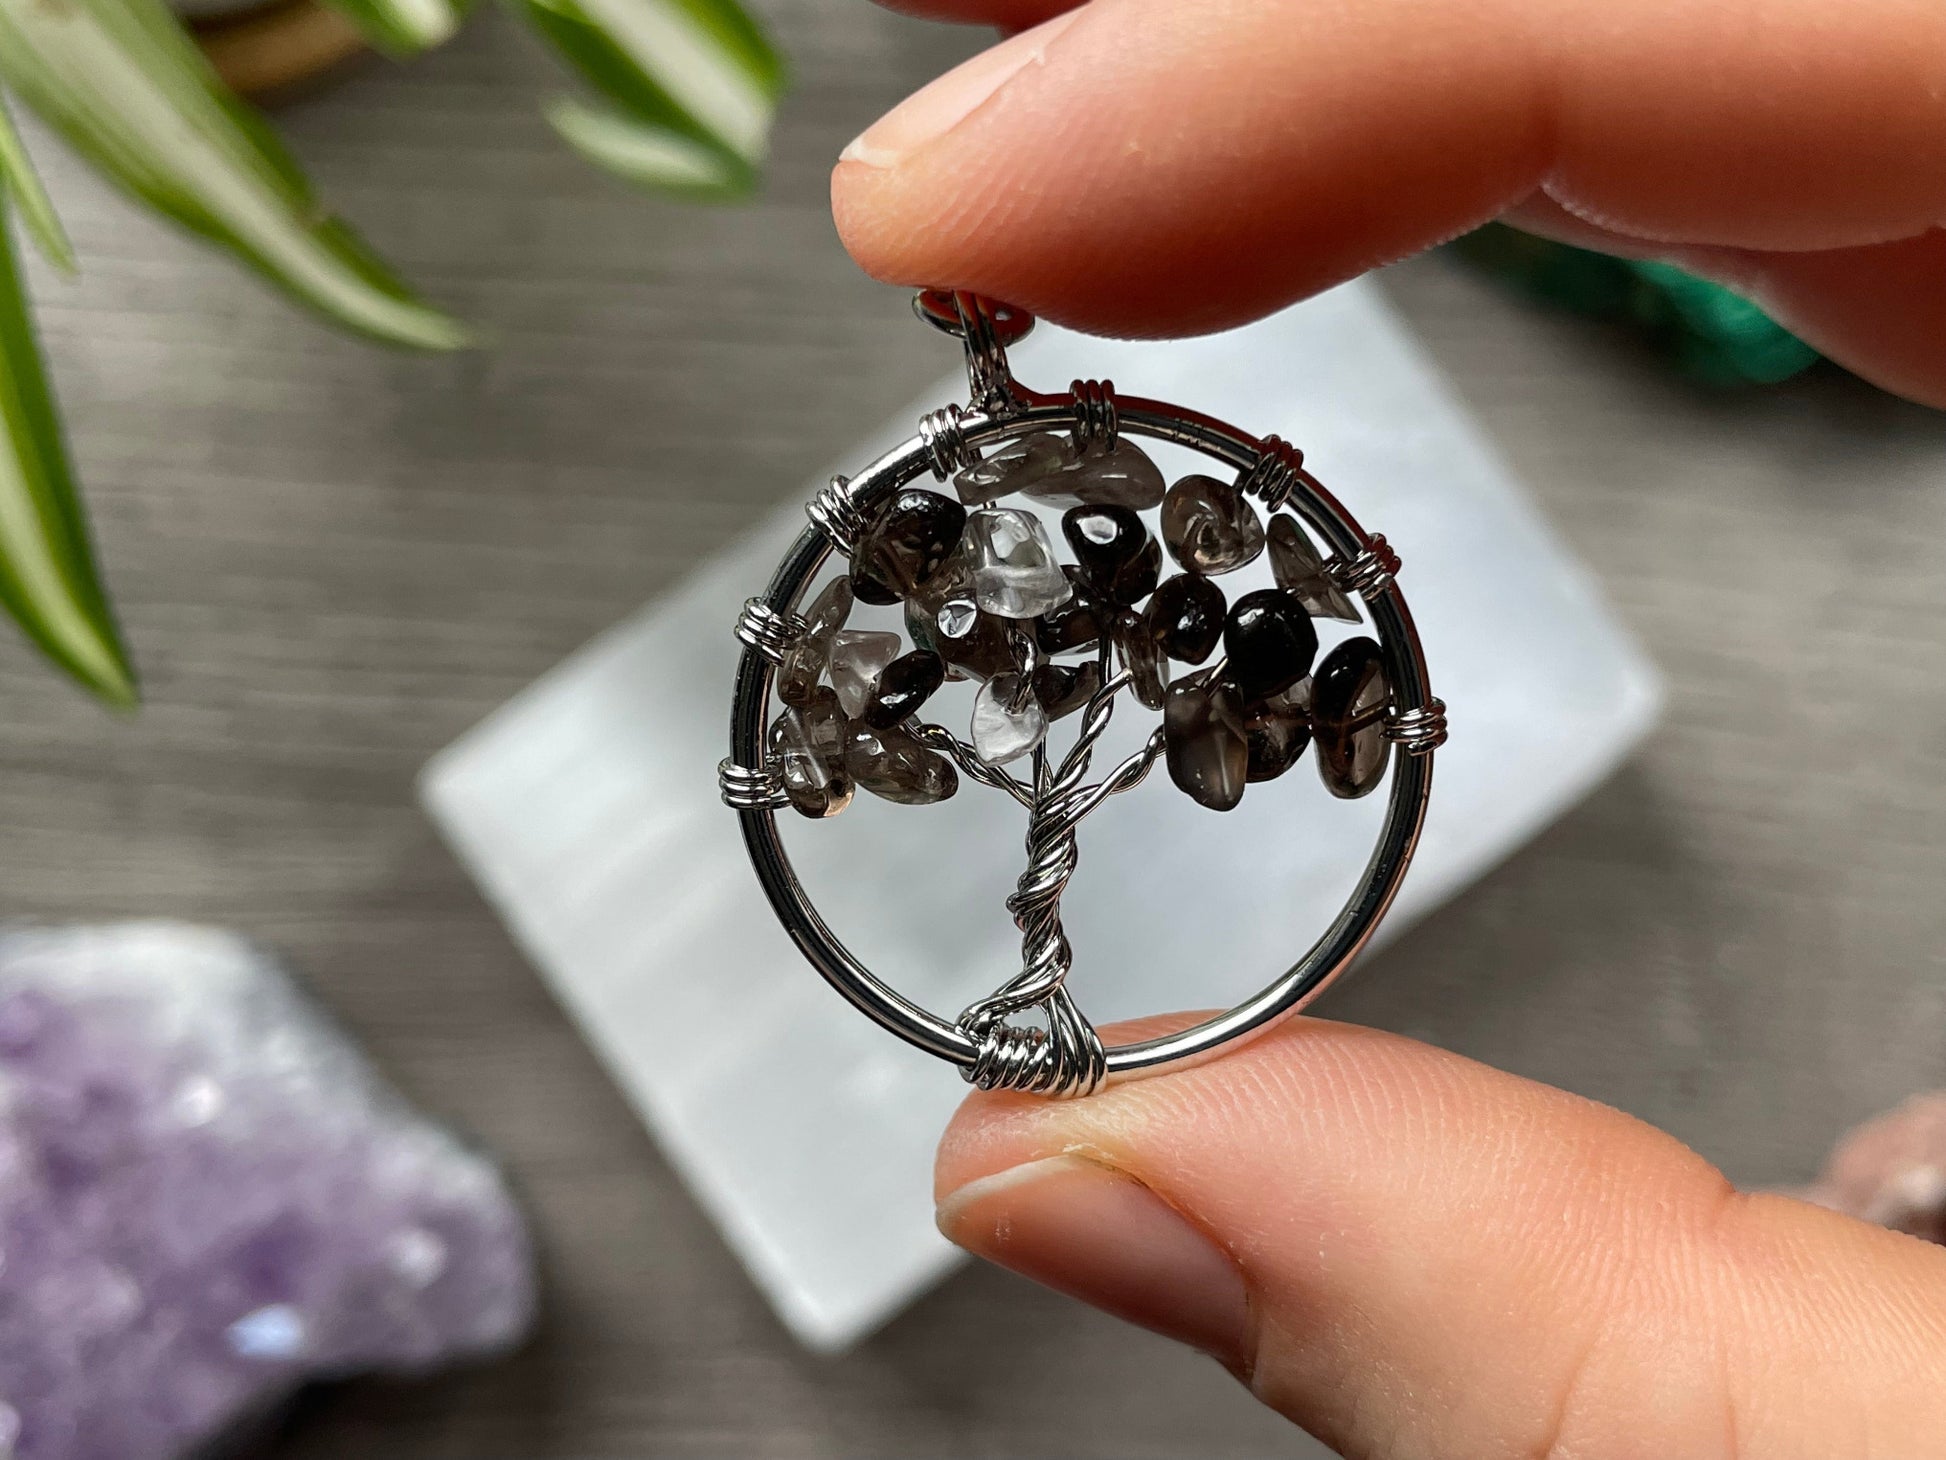 A tree of life with smoky quartz crystals as the leaves on the tree is in the image. The keychain has a number of small multi-coloured beads to represent the chakras on the chain. The keychain sits atop a slab of selenite. Malachite, pink amethyst, and amethyst are nearby.